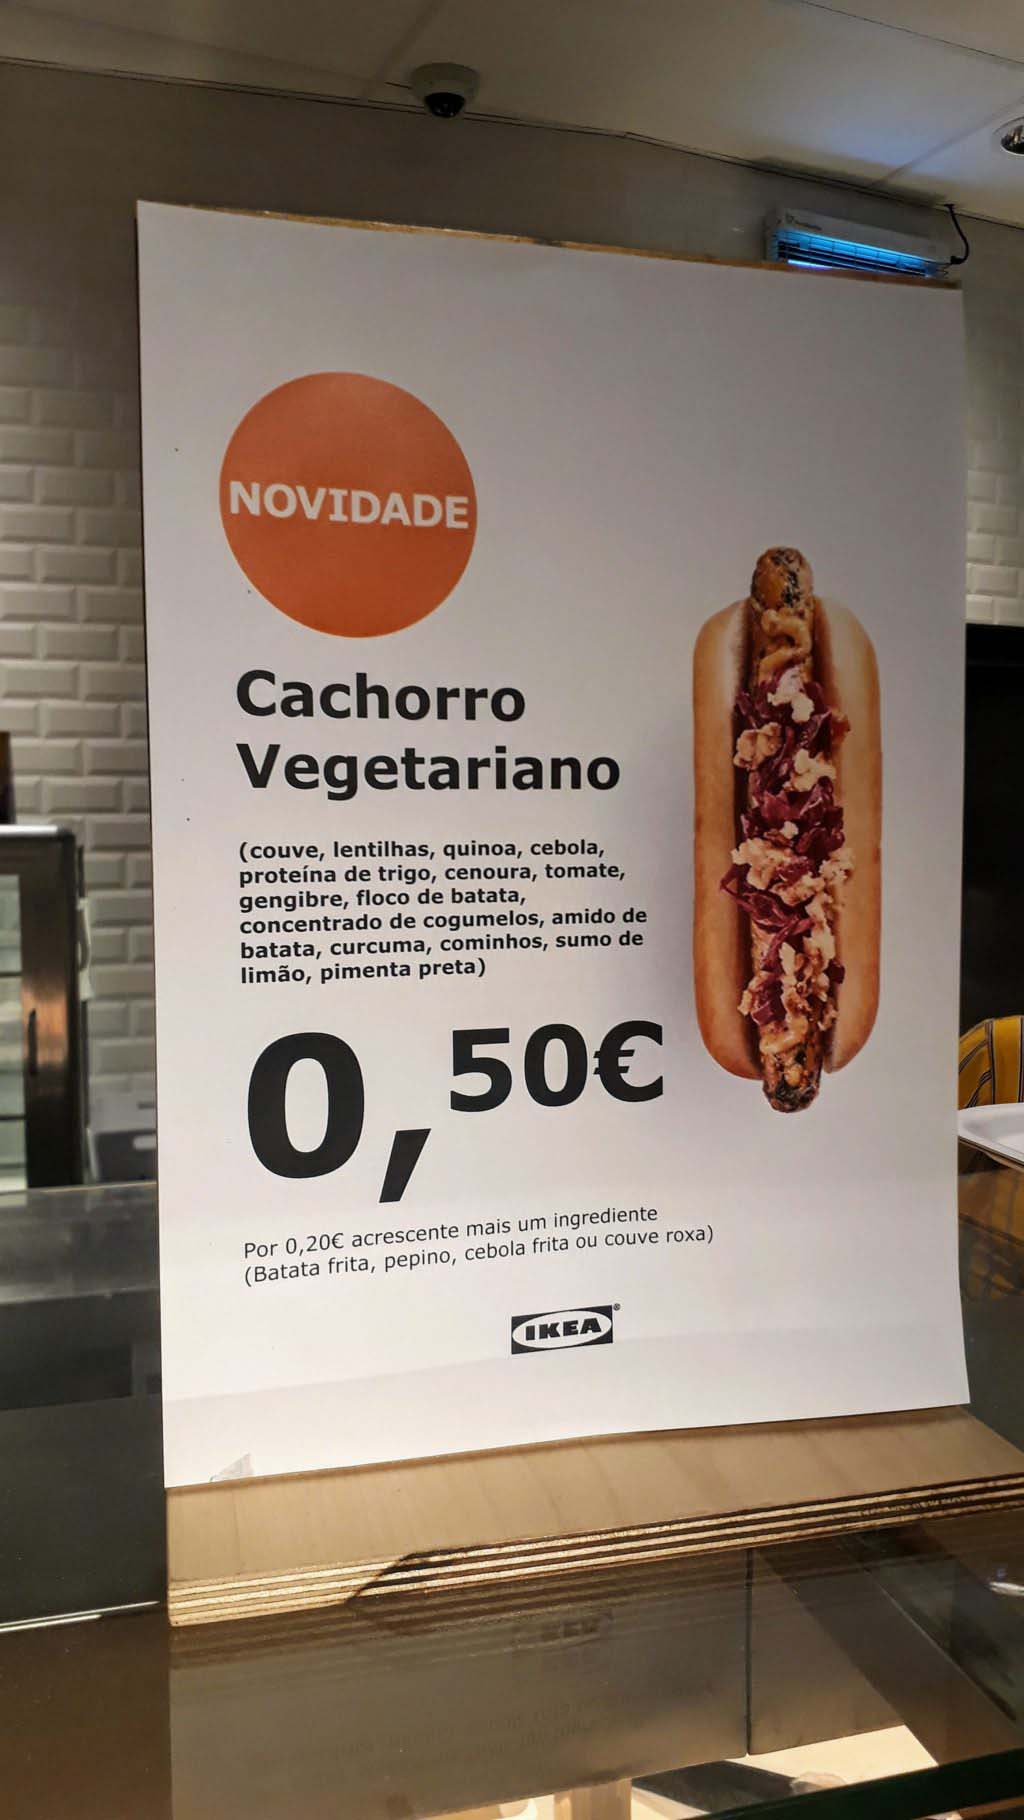 Vegan hot dog at IKEA in Portugal for 50 cents